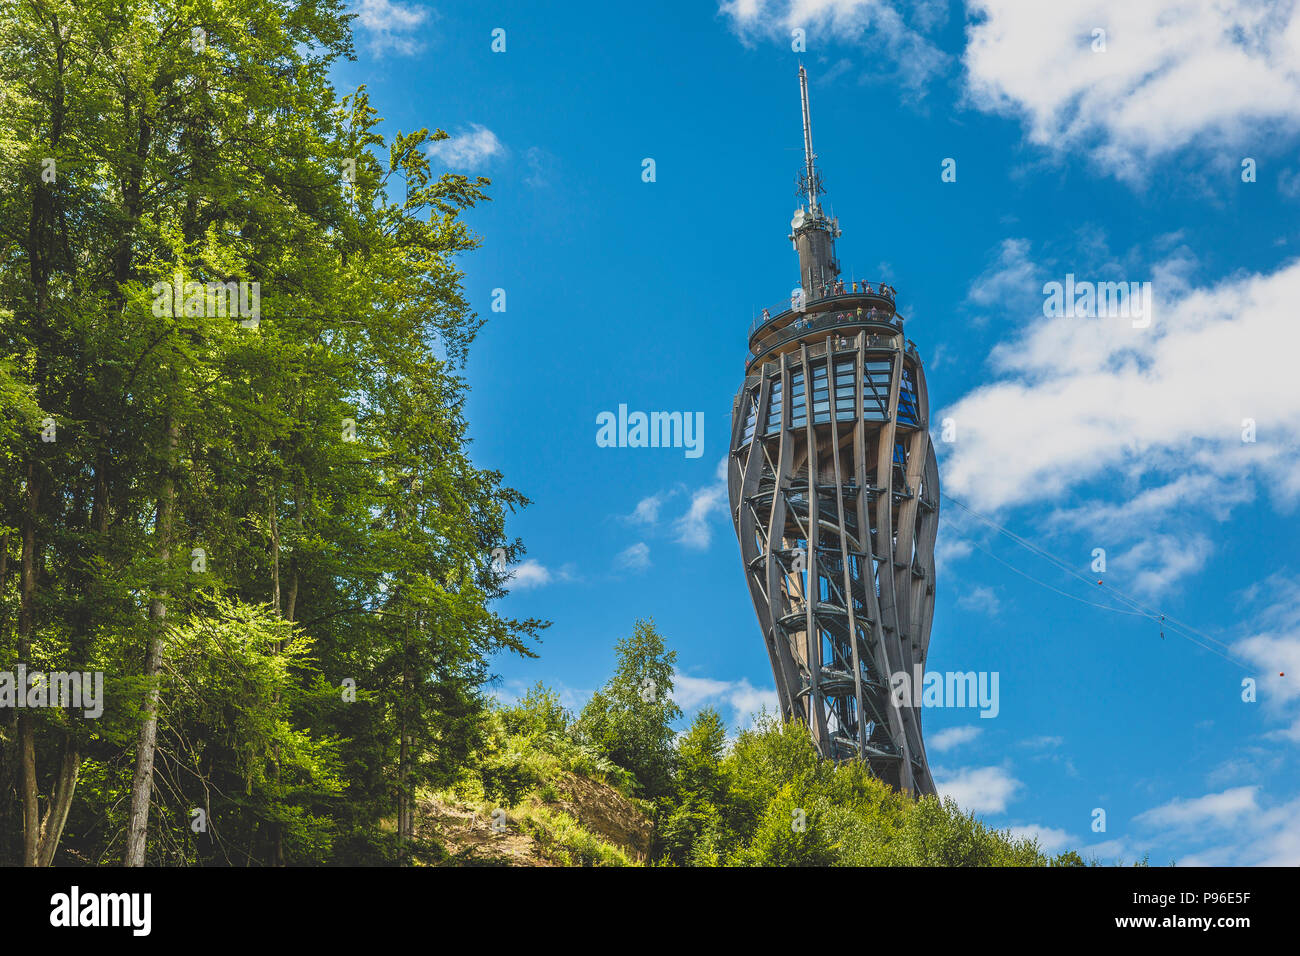 Austria, Carinthia, Observation tower Pyramidenkogel at Woerthersee Stock Photo